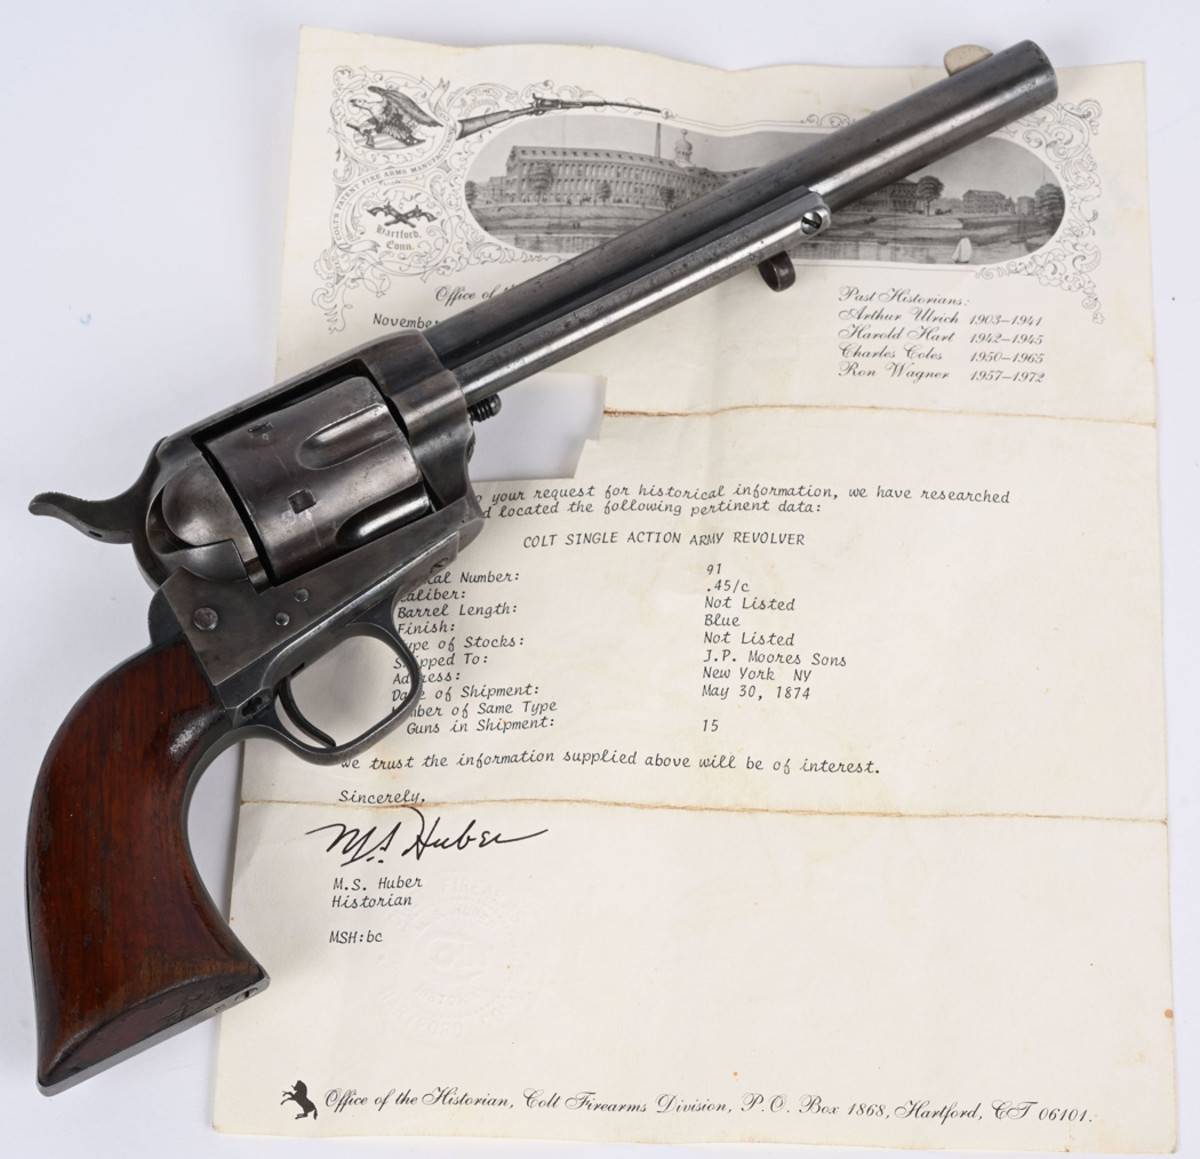 Colt pinched-frame .45-caliber Single-Action Army Revolver manufactured in 1874 and one of a shipment of 15 guns sent to J.P. Moores & Sons (NYC) that year. Accompanied by 1985 letter of documentation from Colt factory historian. NRA Silver Medal winner in 1989.